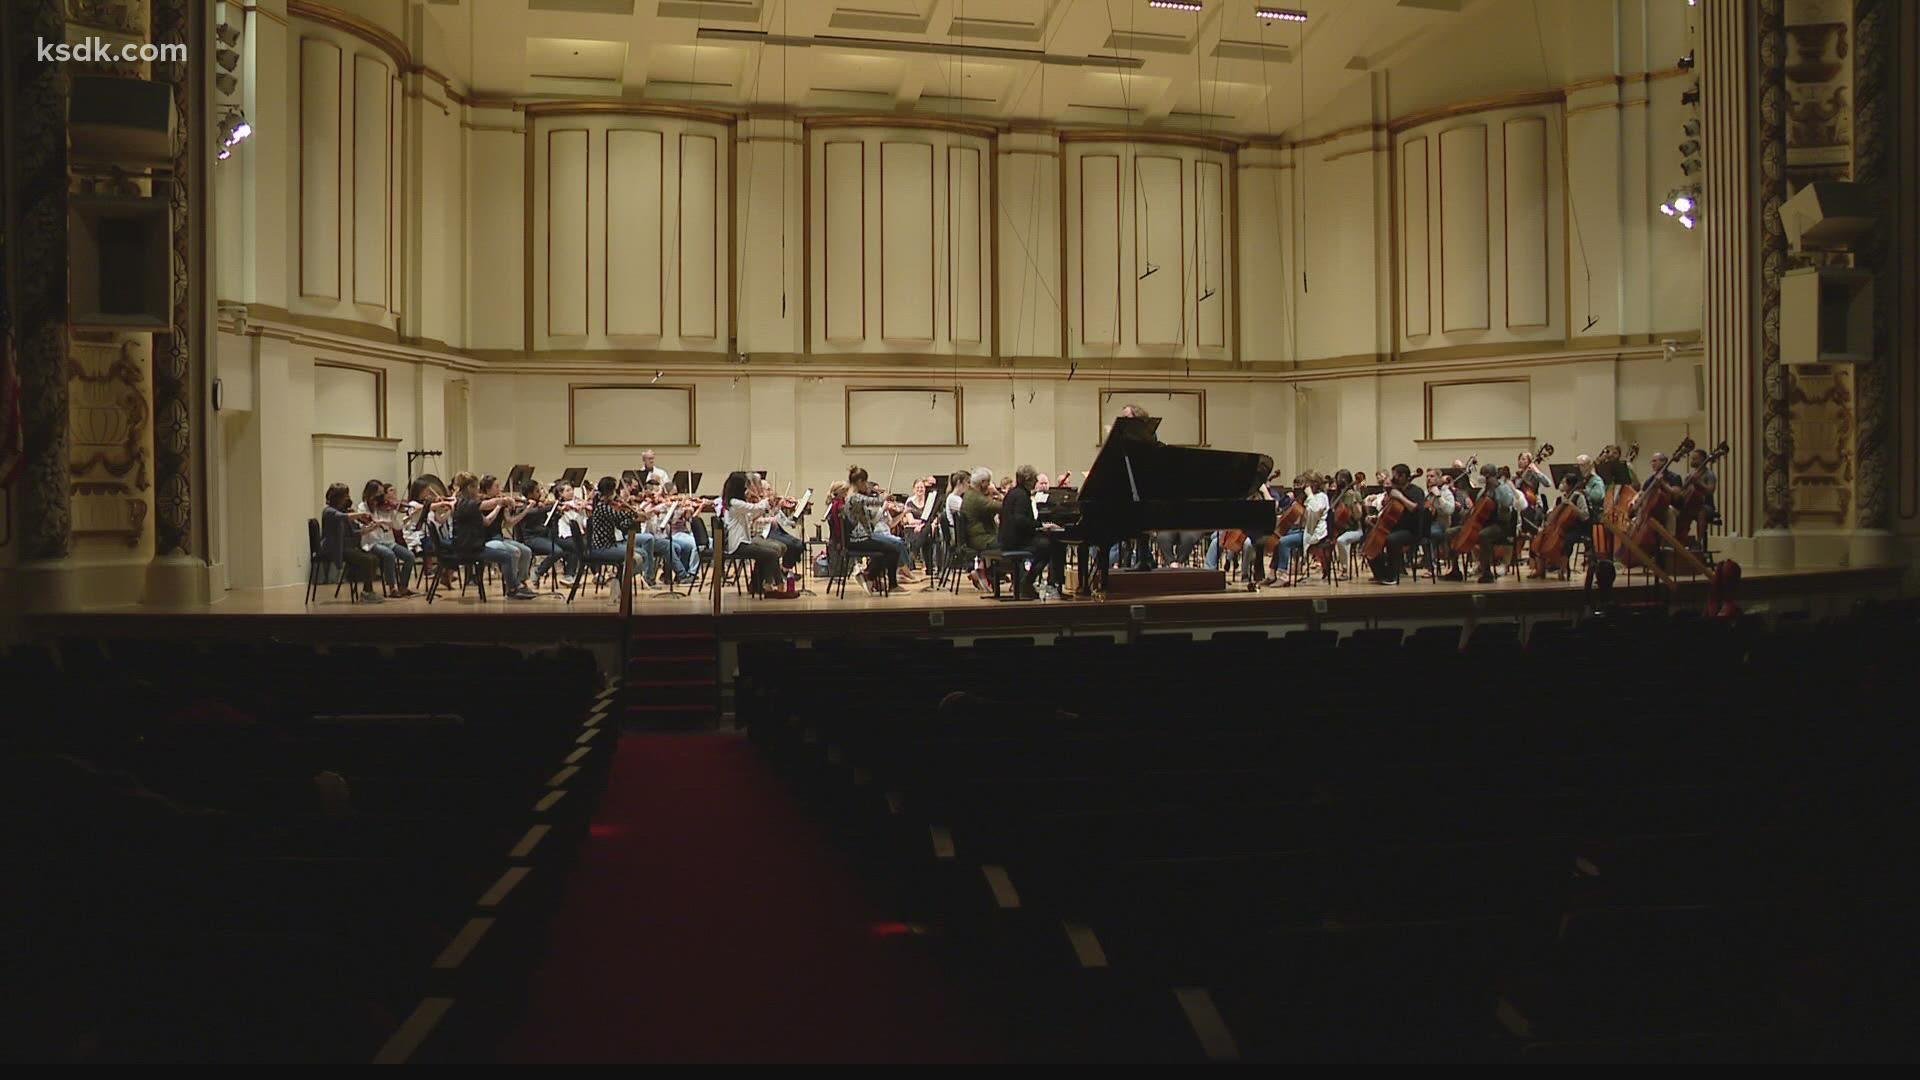 The $100 million renovation project would give Powell Hall a larger lobby and a brand new seating area when you go to hear the St. Louis Symphony.